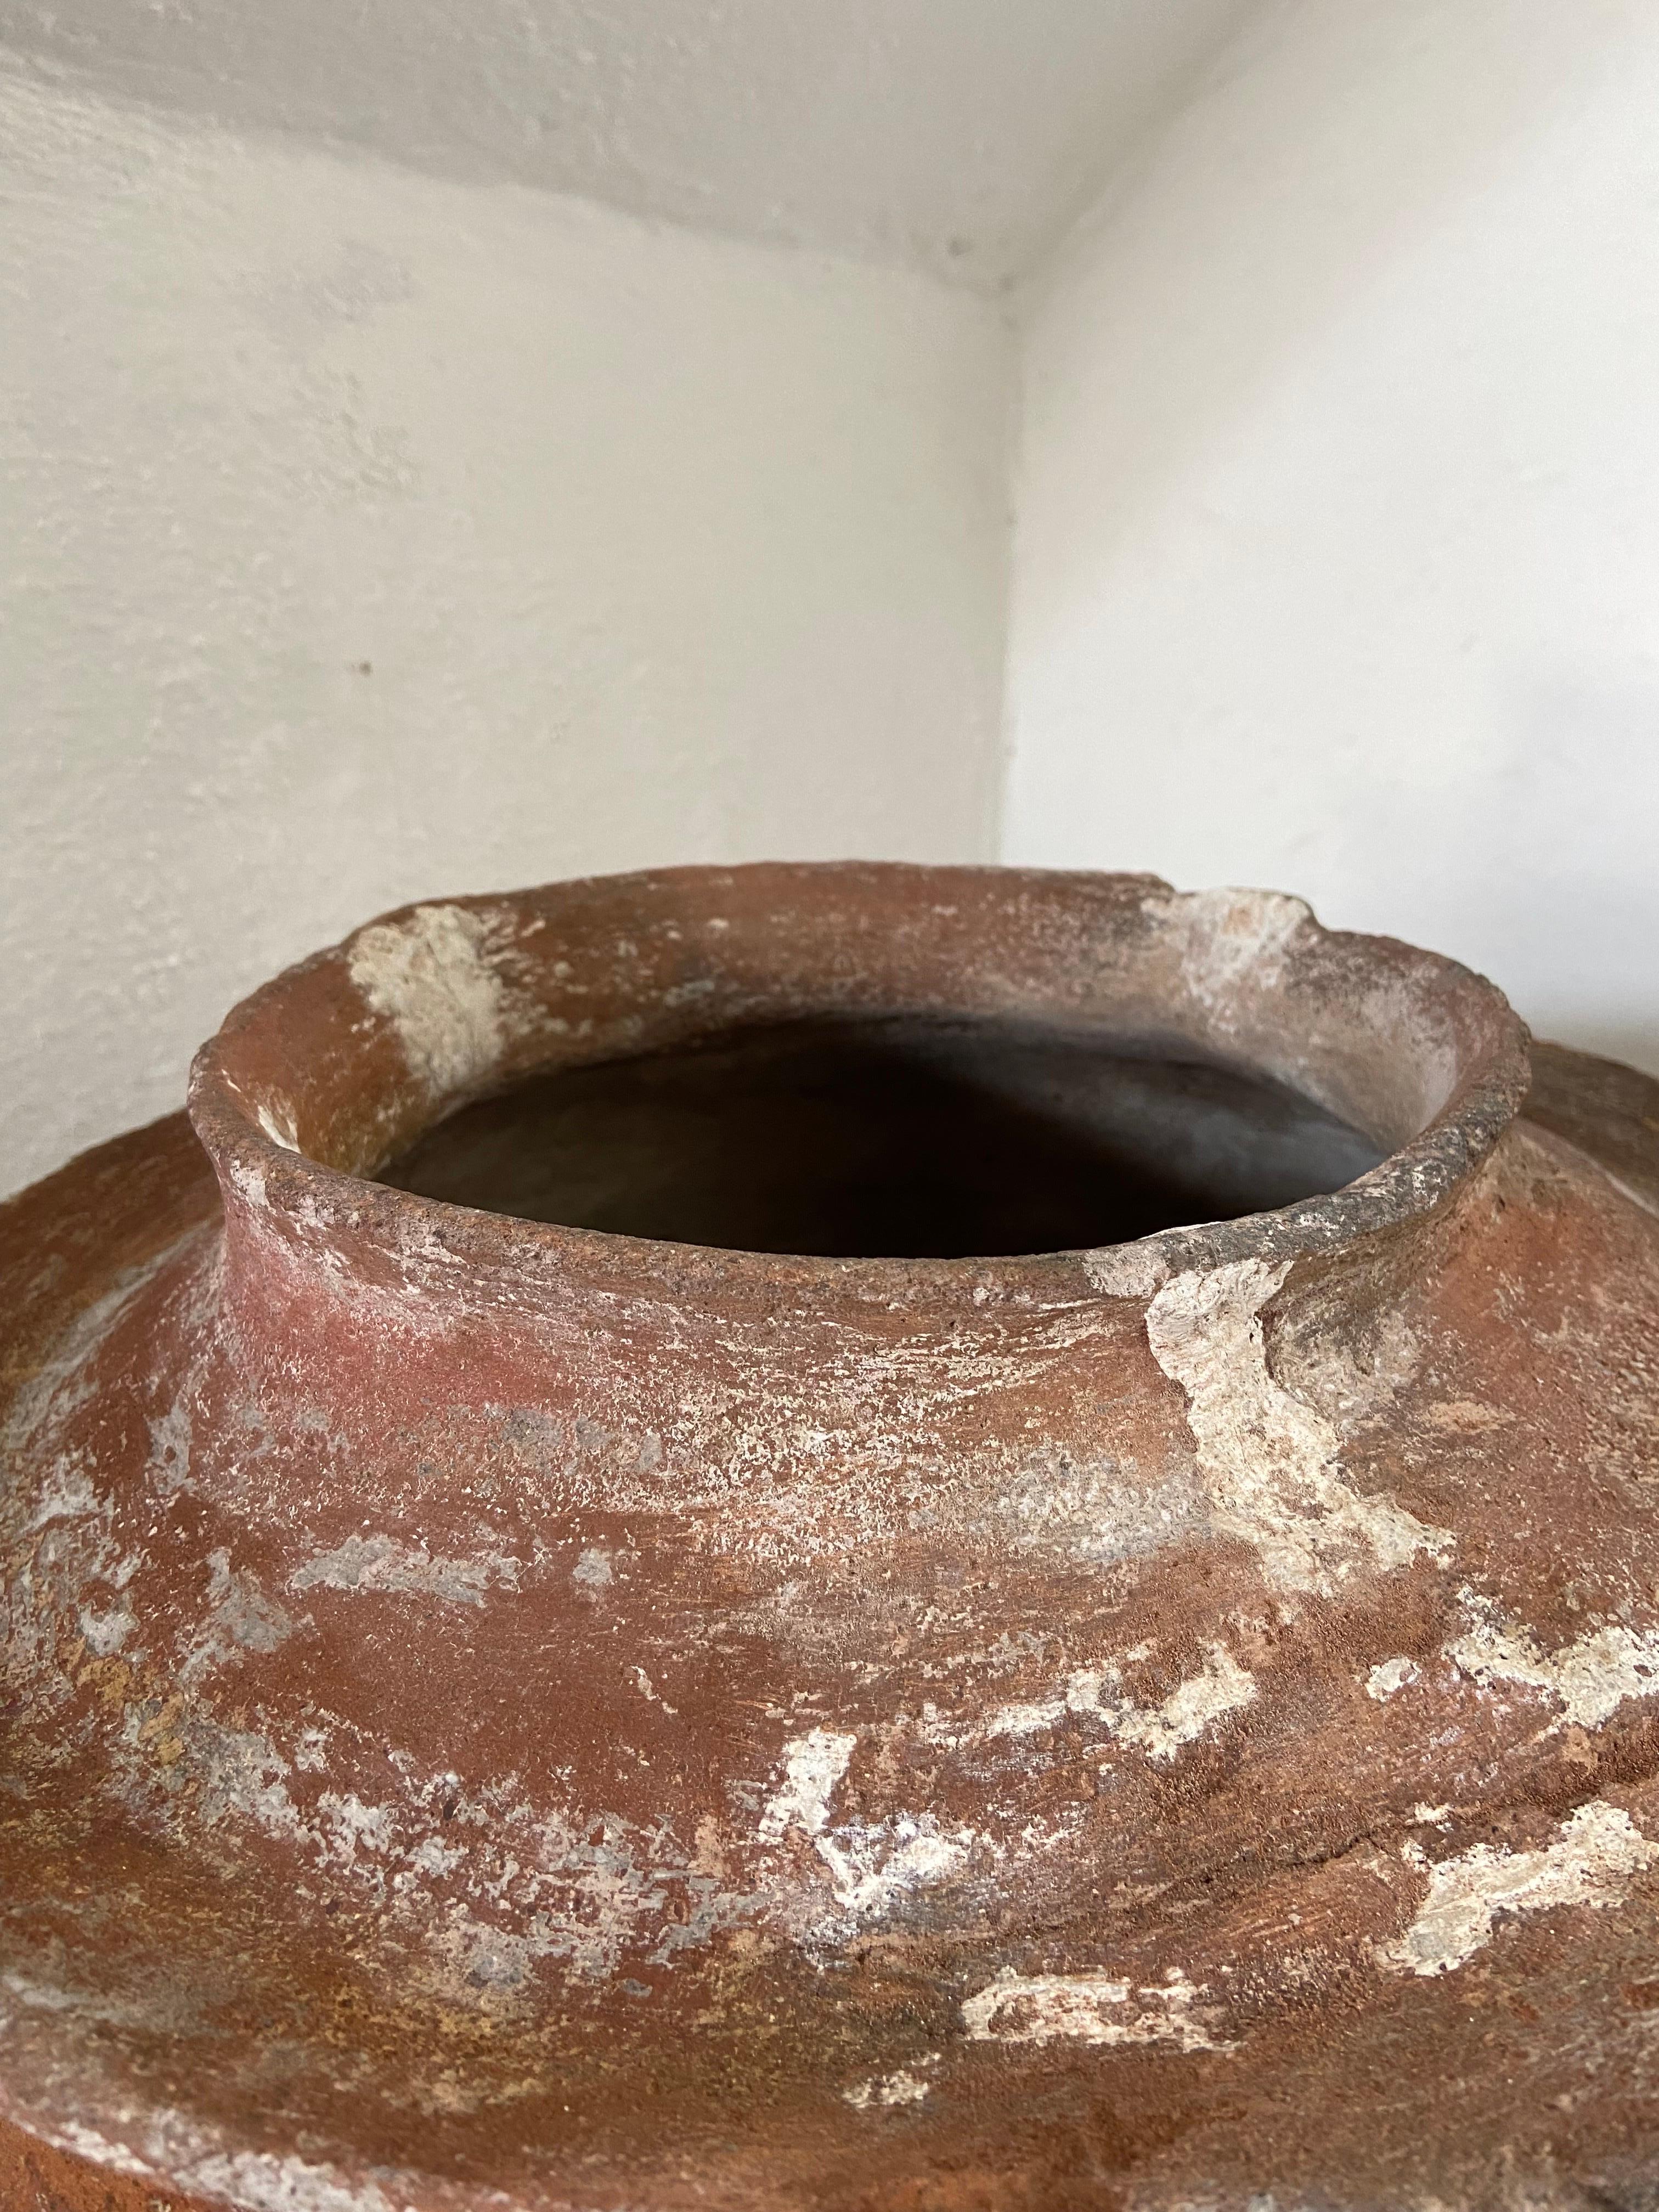 Early 20th Century Terracotta Water Vessel from Mexico In Distressed Condition In San Miguel de Allende, Guanajuato